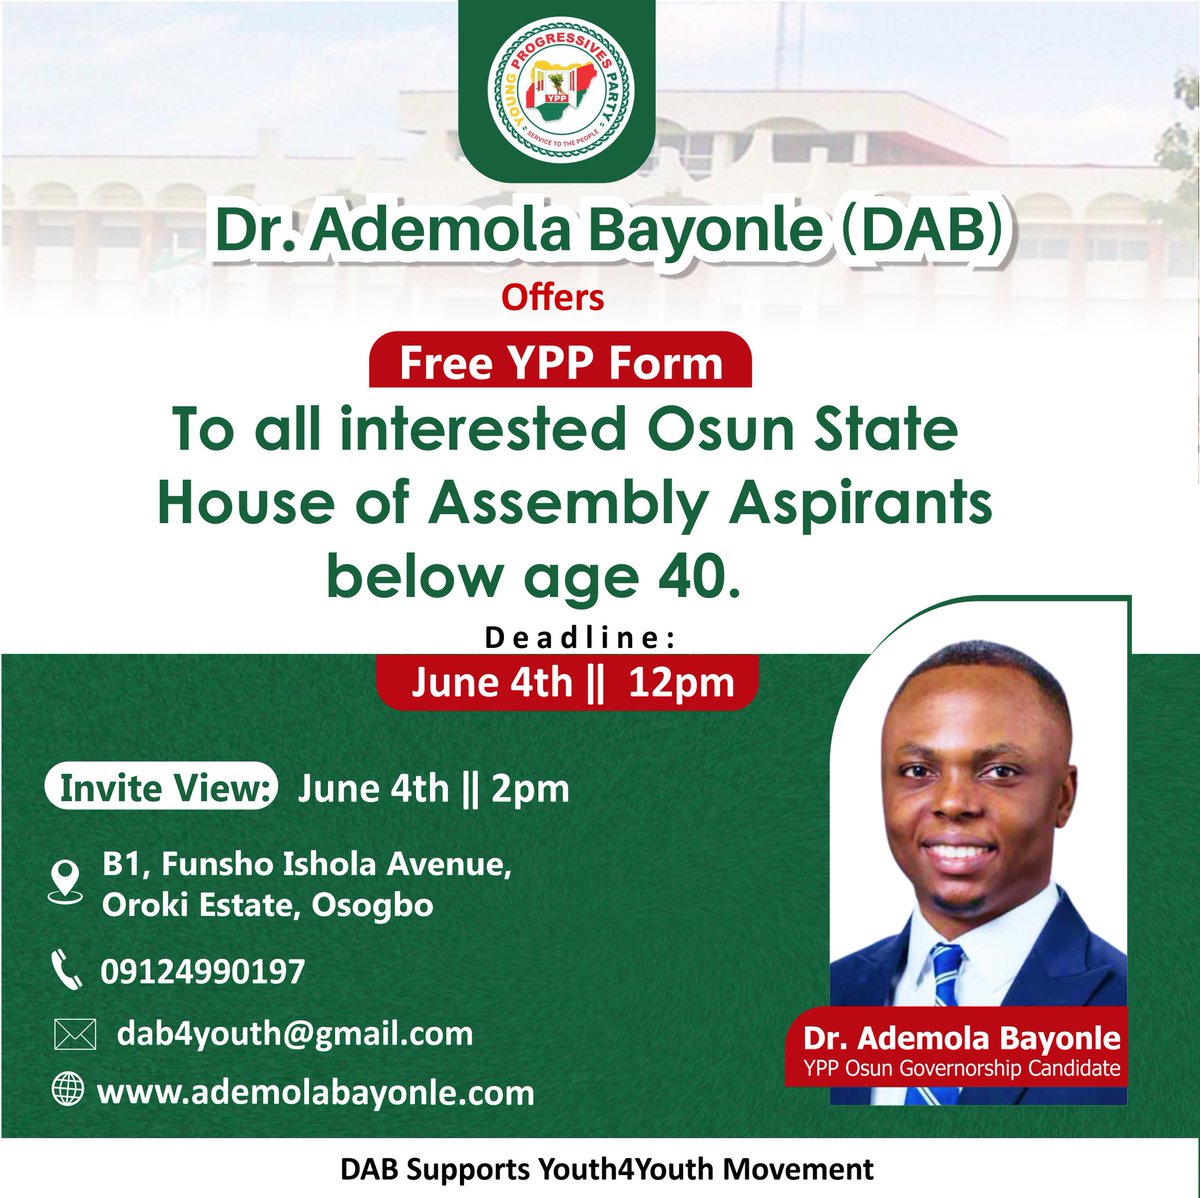 In the bid to deepen the propagation of the Youth4Youth Movement, Dr. Ademola Bayonle (DAB) has offered to give out

Free YPP Form to all interested Osun State House of Assembly Aspirants below age 40.

Let's rescue Osun!
@AishaYesufu
@YeleSowore
@Dr_IfeanyiUbah
@DeleMomodu